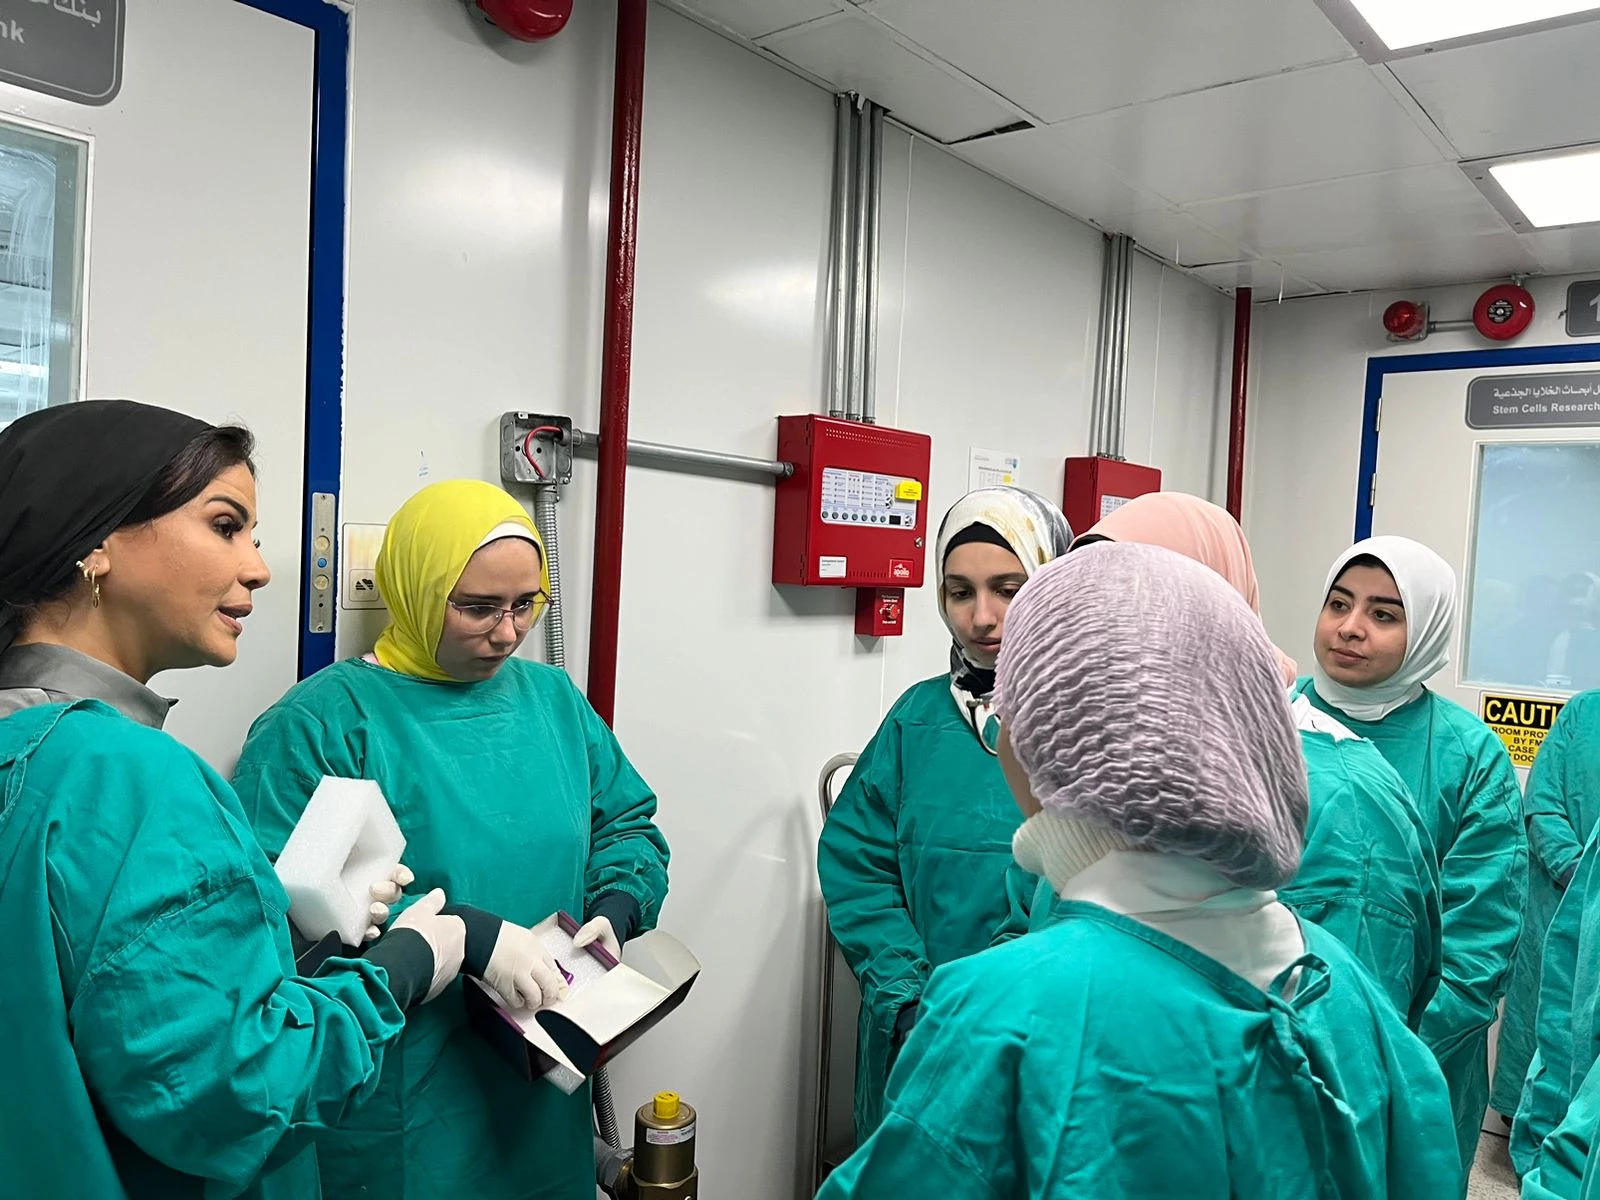 The Department of Cultural and Social Activity in Babi Qir organized a scientific trip for students of the College of Pharmacy to the new branch of the Saudi German Hospital in Alexandria on: 7/12/20235